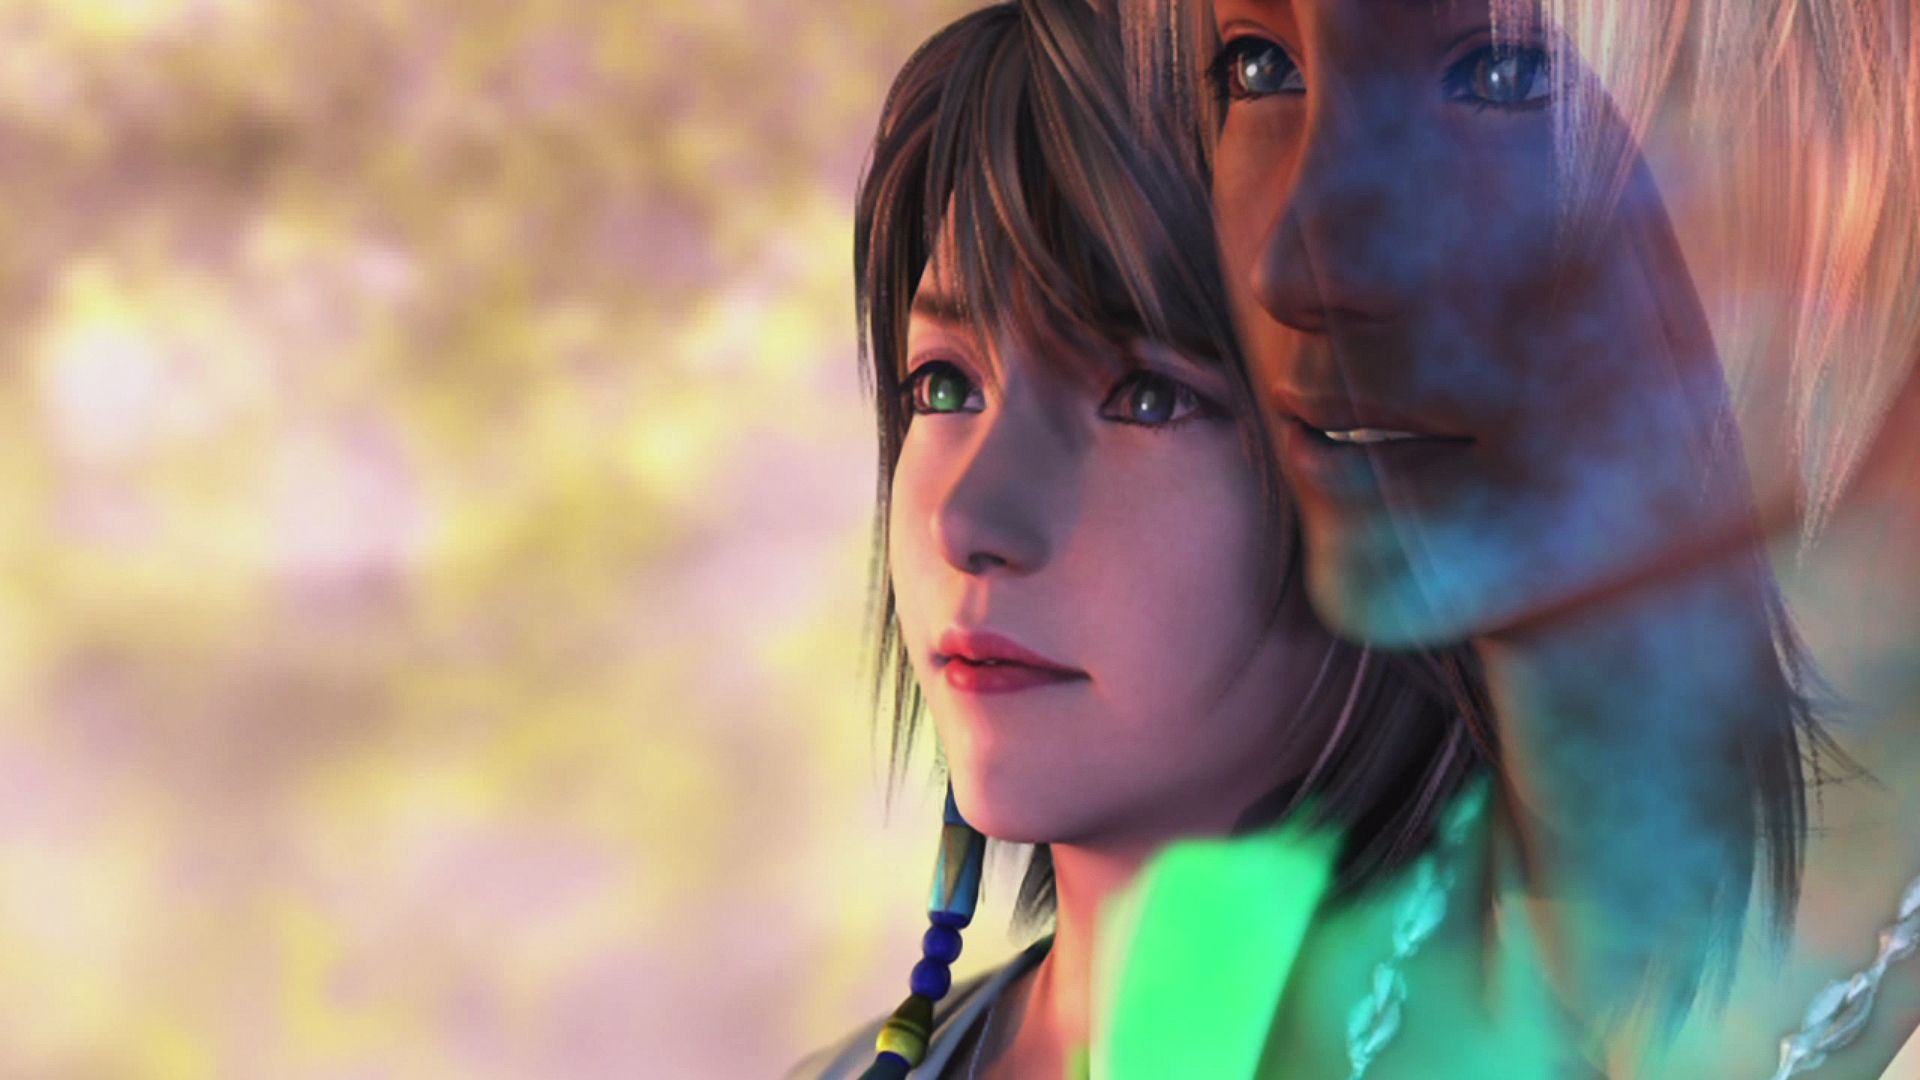 Final Fantasy X: an ode to Tidus and Yuna